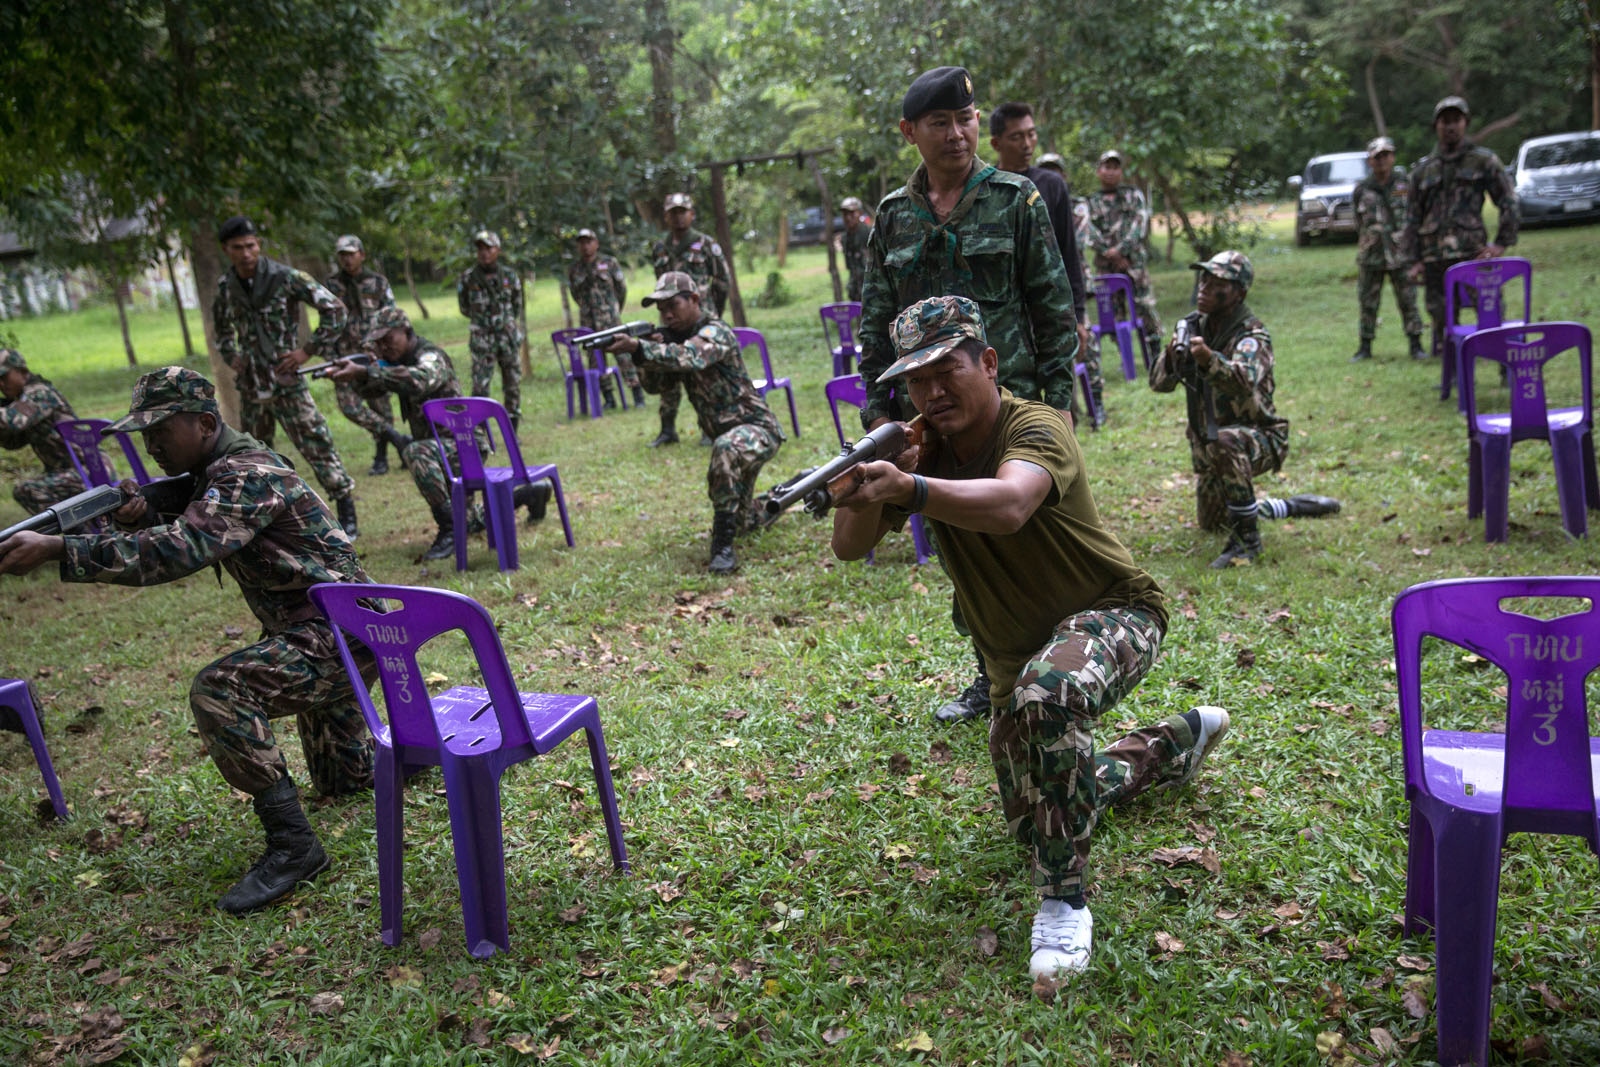 THAILAND'S FOREST RANGERS - New forest ranger recruits have weapons training as part...